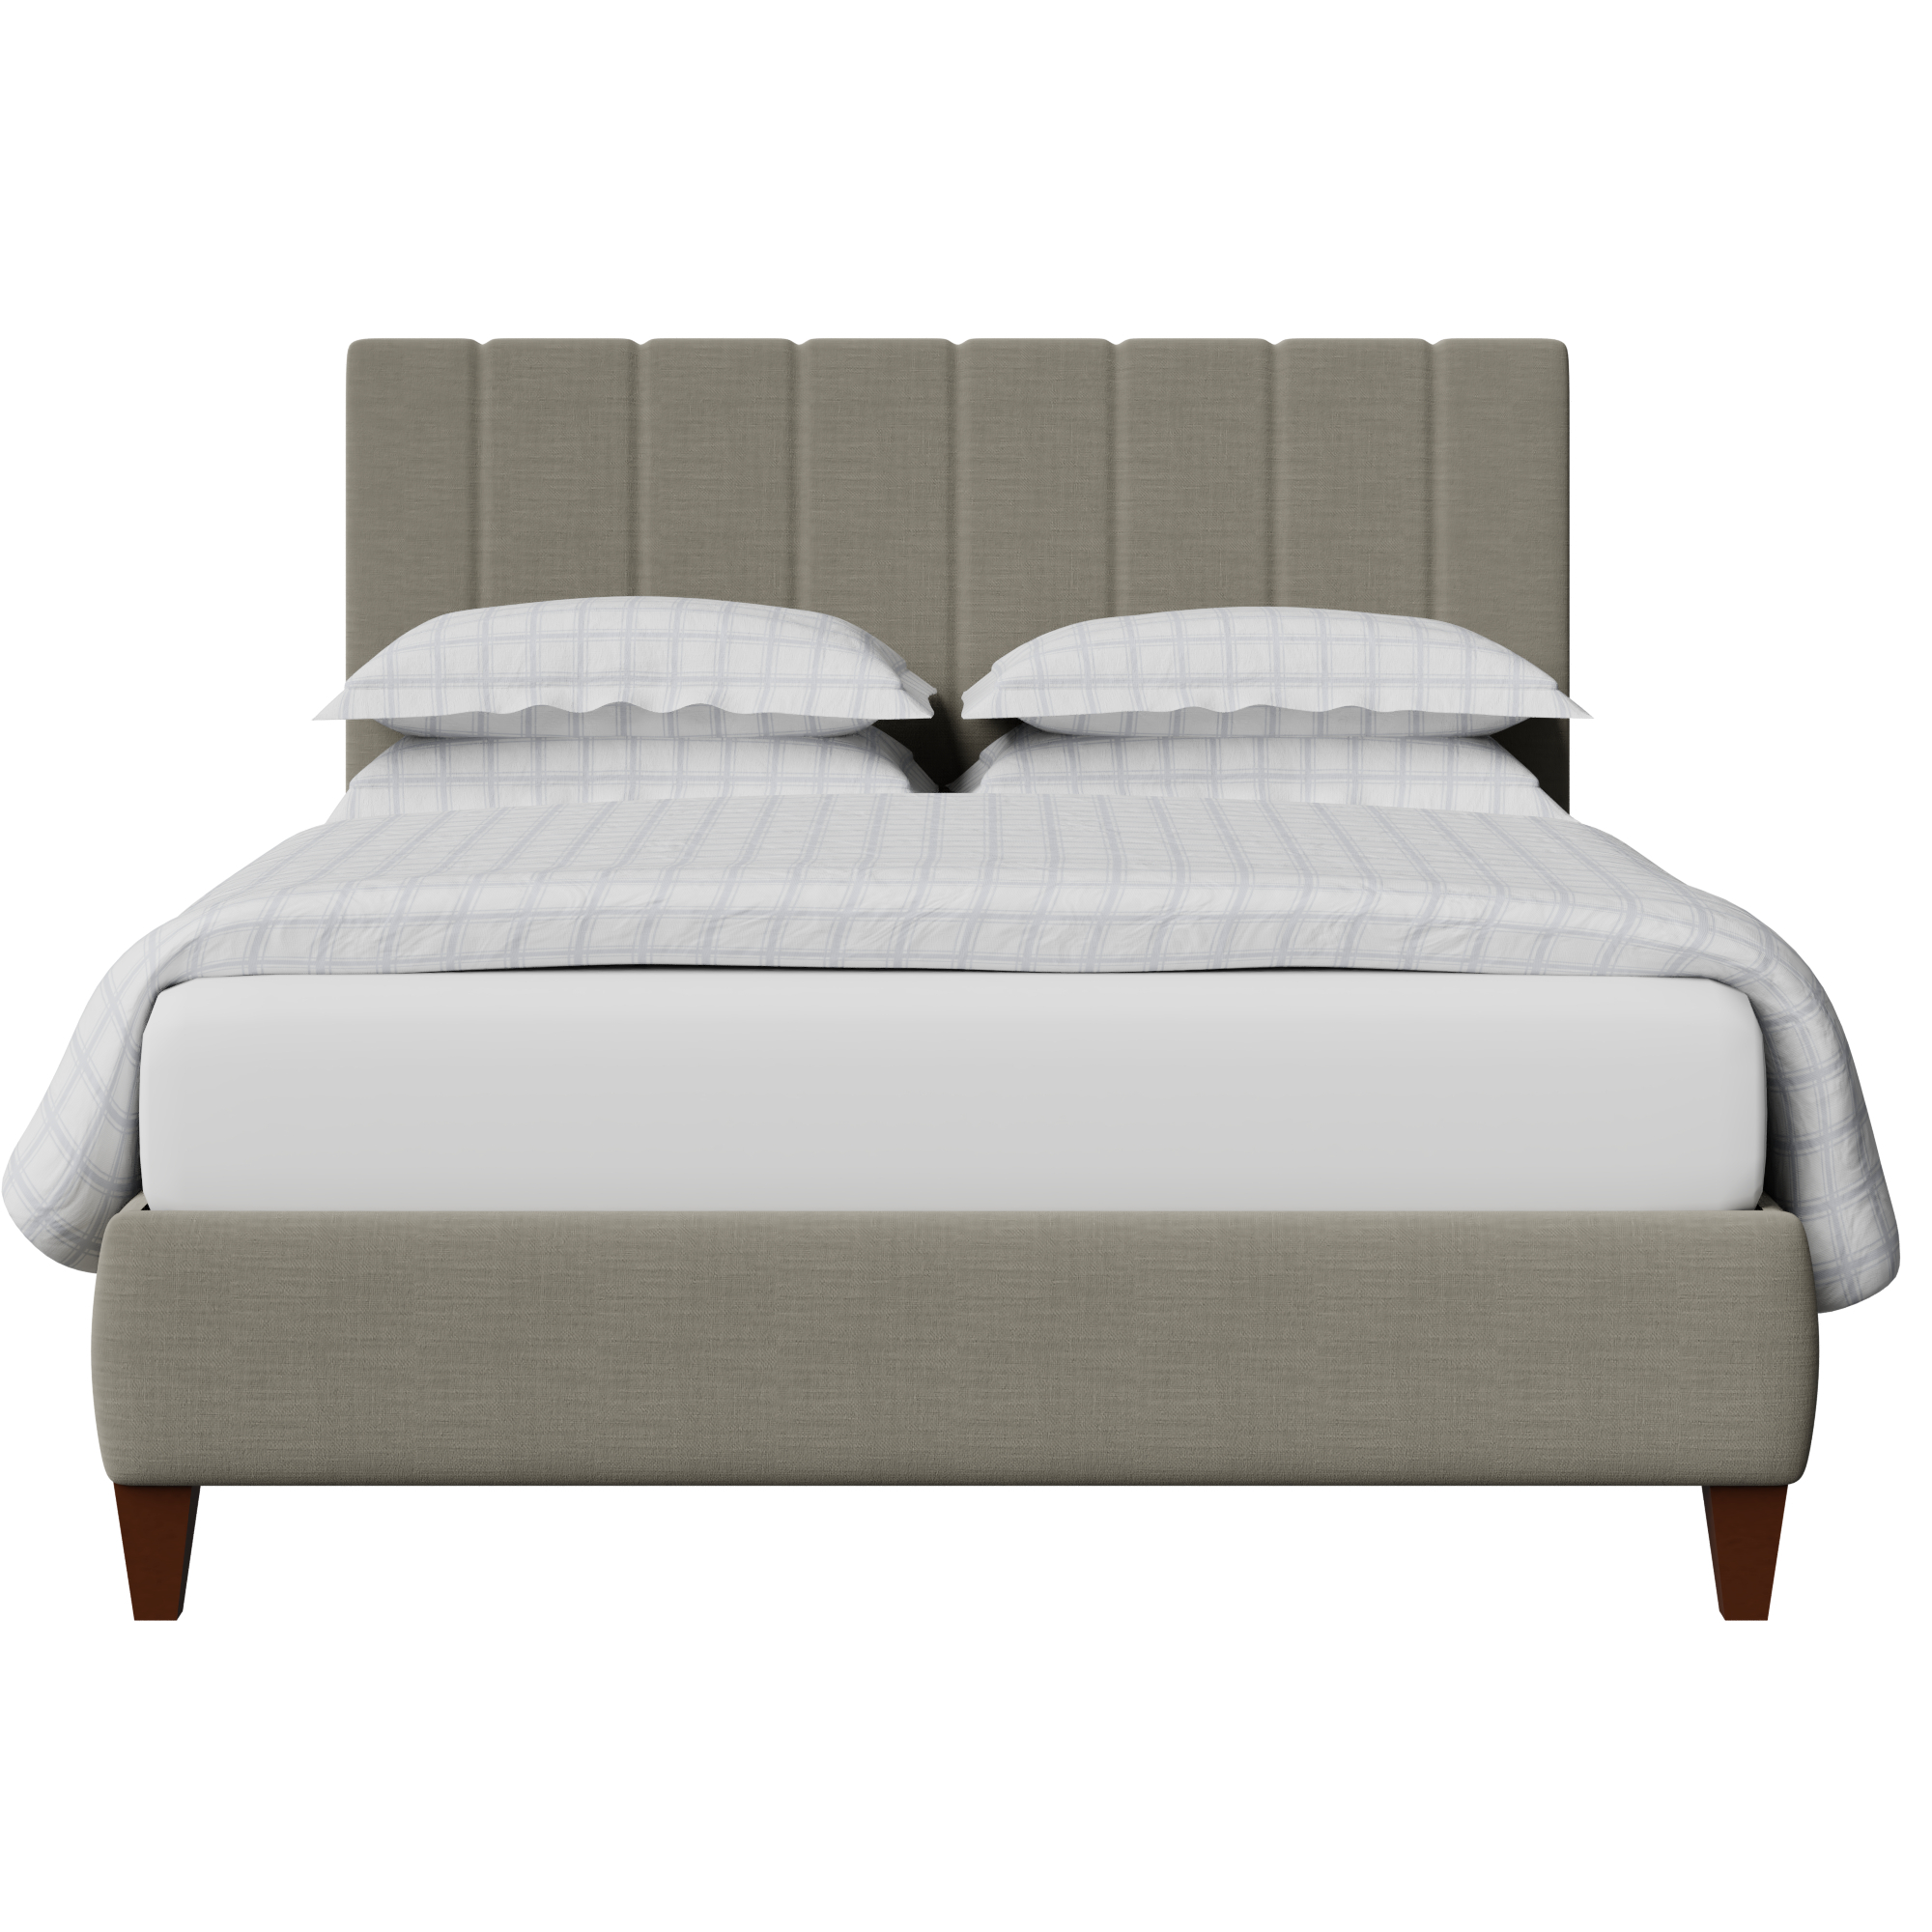 Yushan Pleated upholstered bed in grey fabric